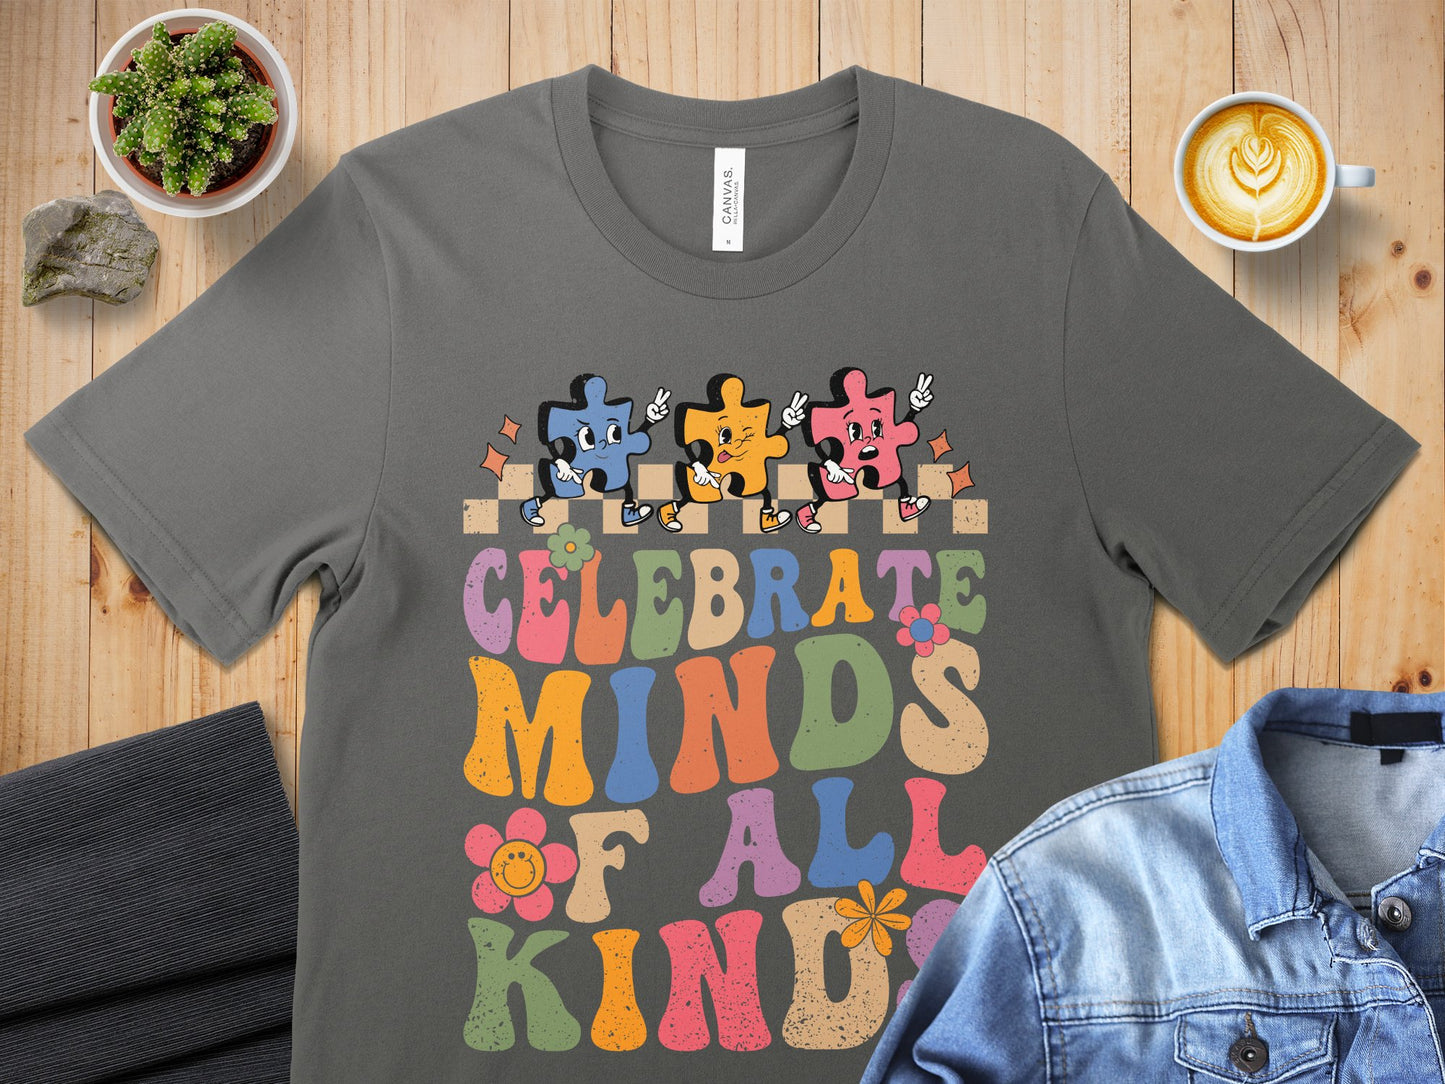 Celebrate Minds of all Kinds-puzzle